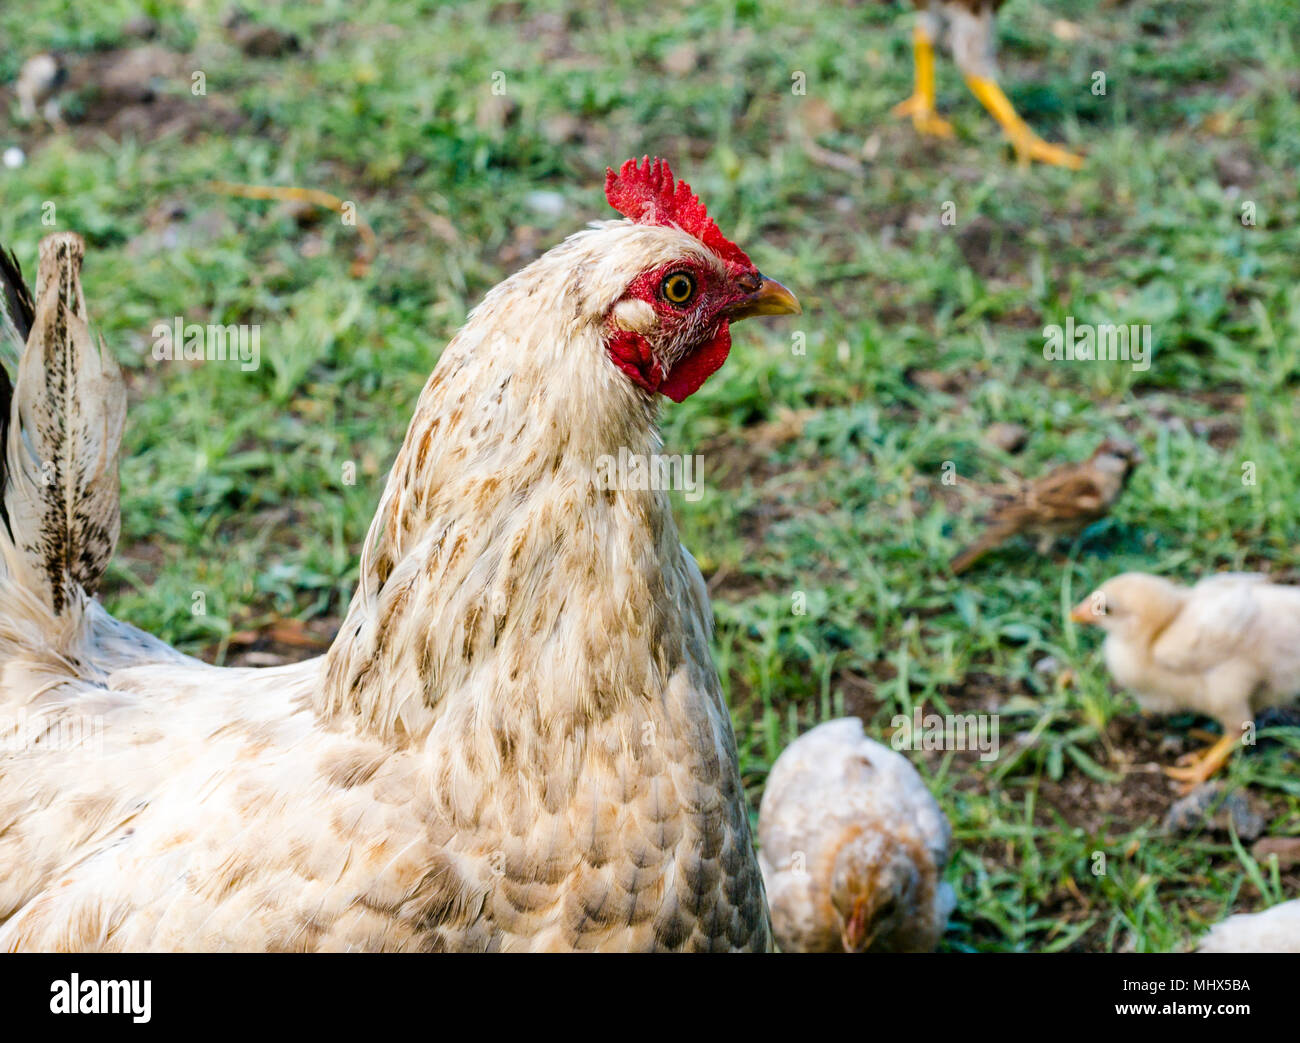 Domestic farmyard chickens, Easter Island, Chile. Close up of female chicken with chicks Stock Photo